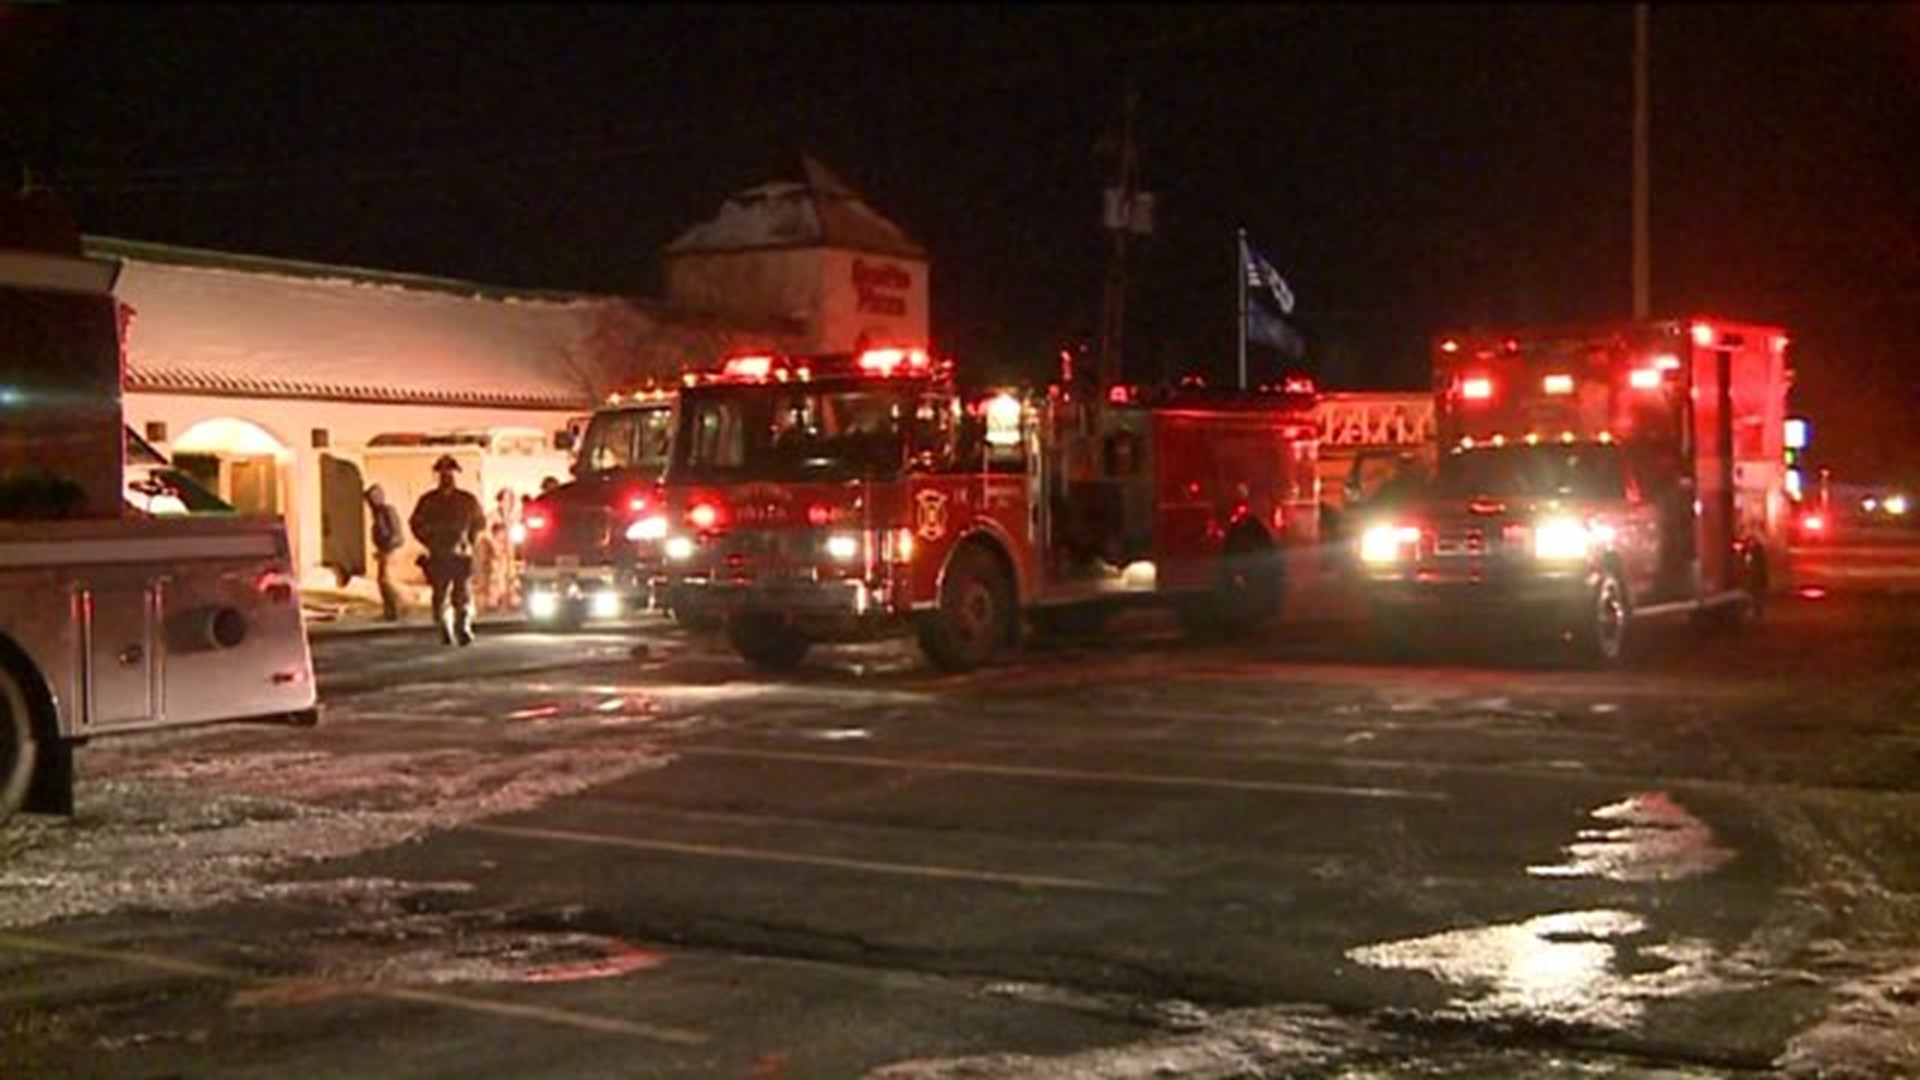 Fire Damages Pizza Place in Luzerne County